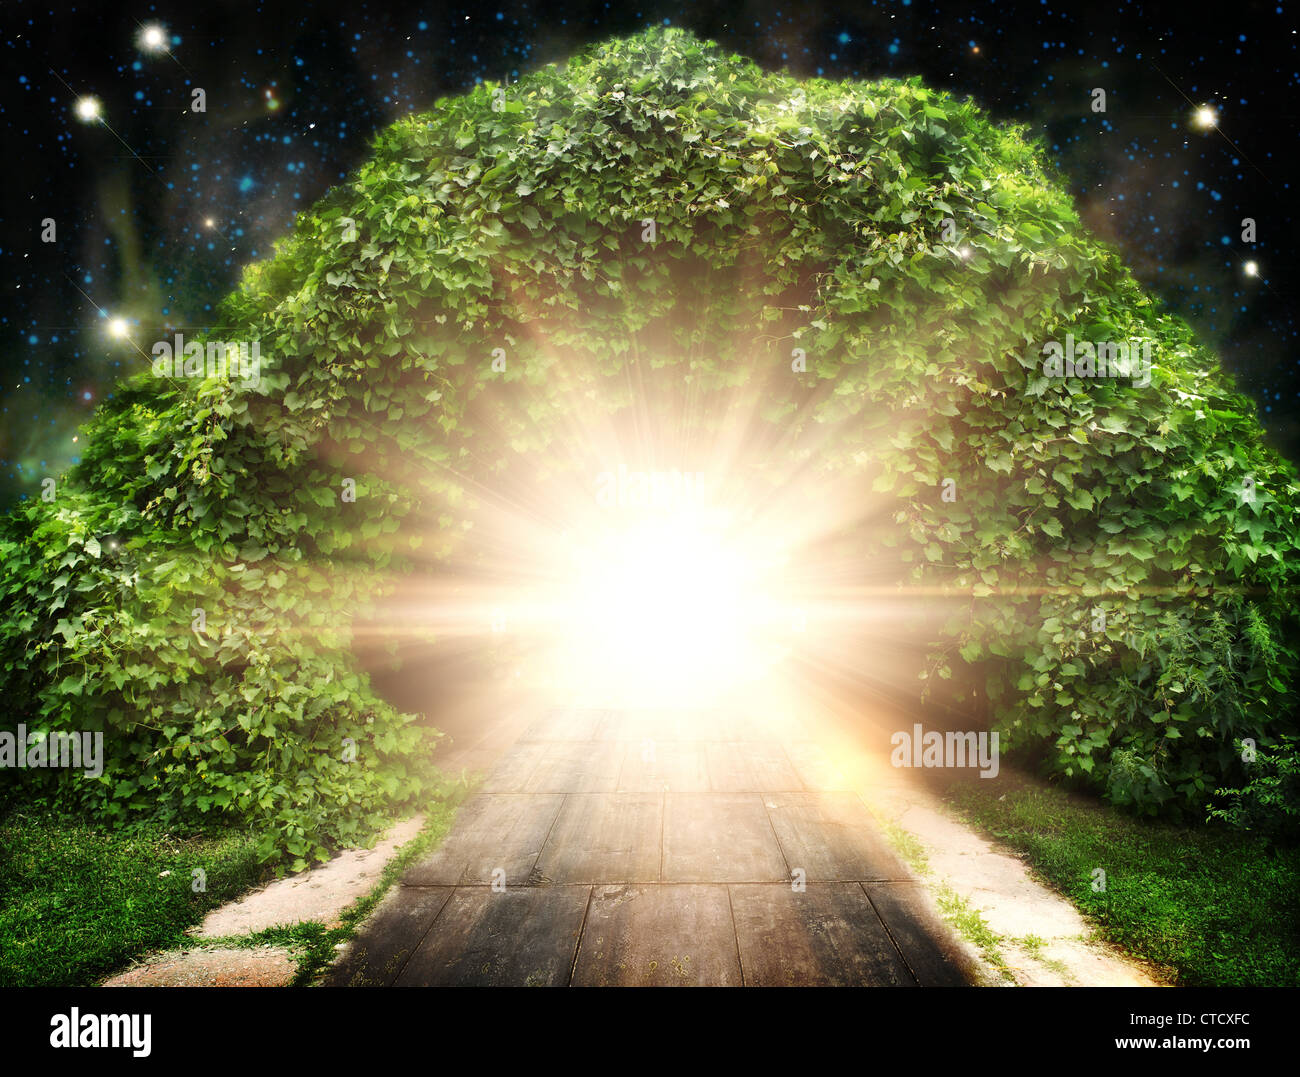 Way to another world, abstract natural backgrounds Stock Photo